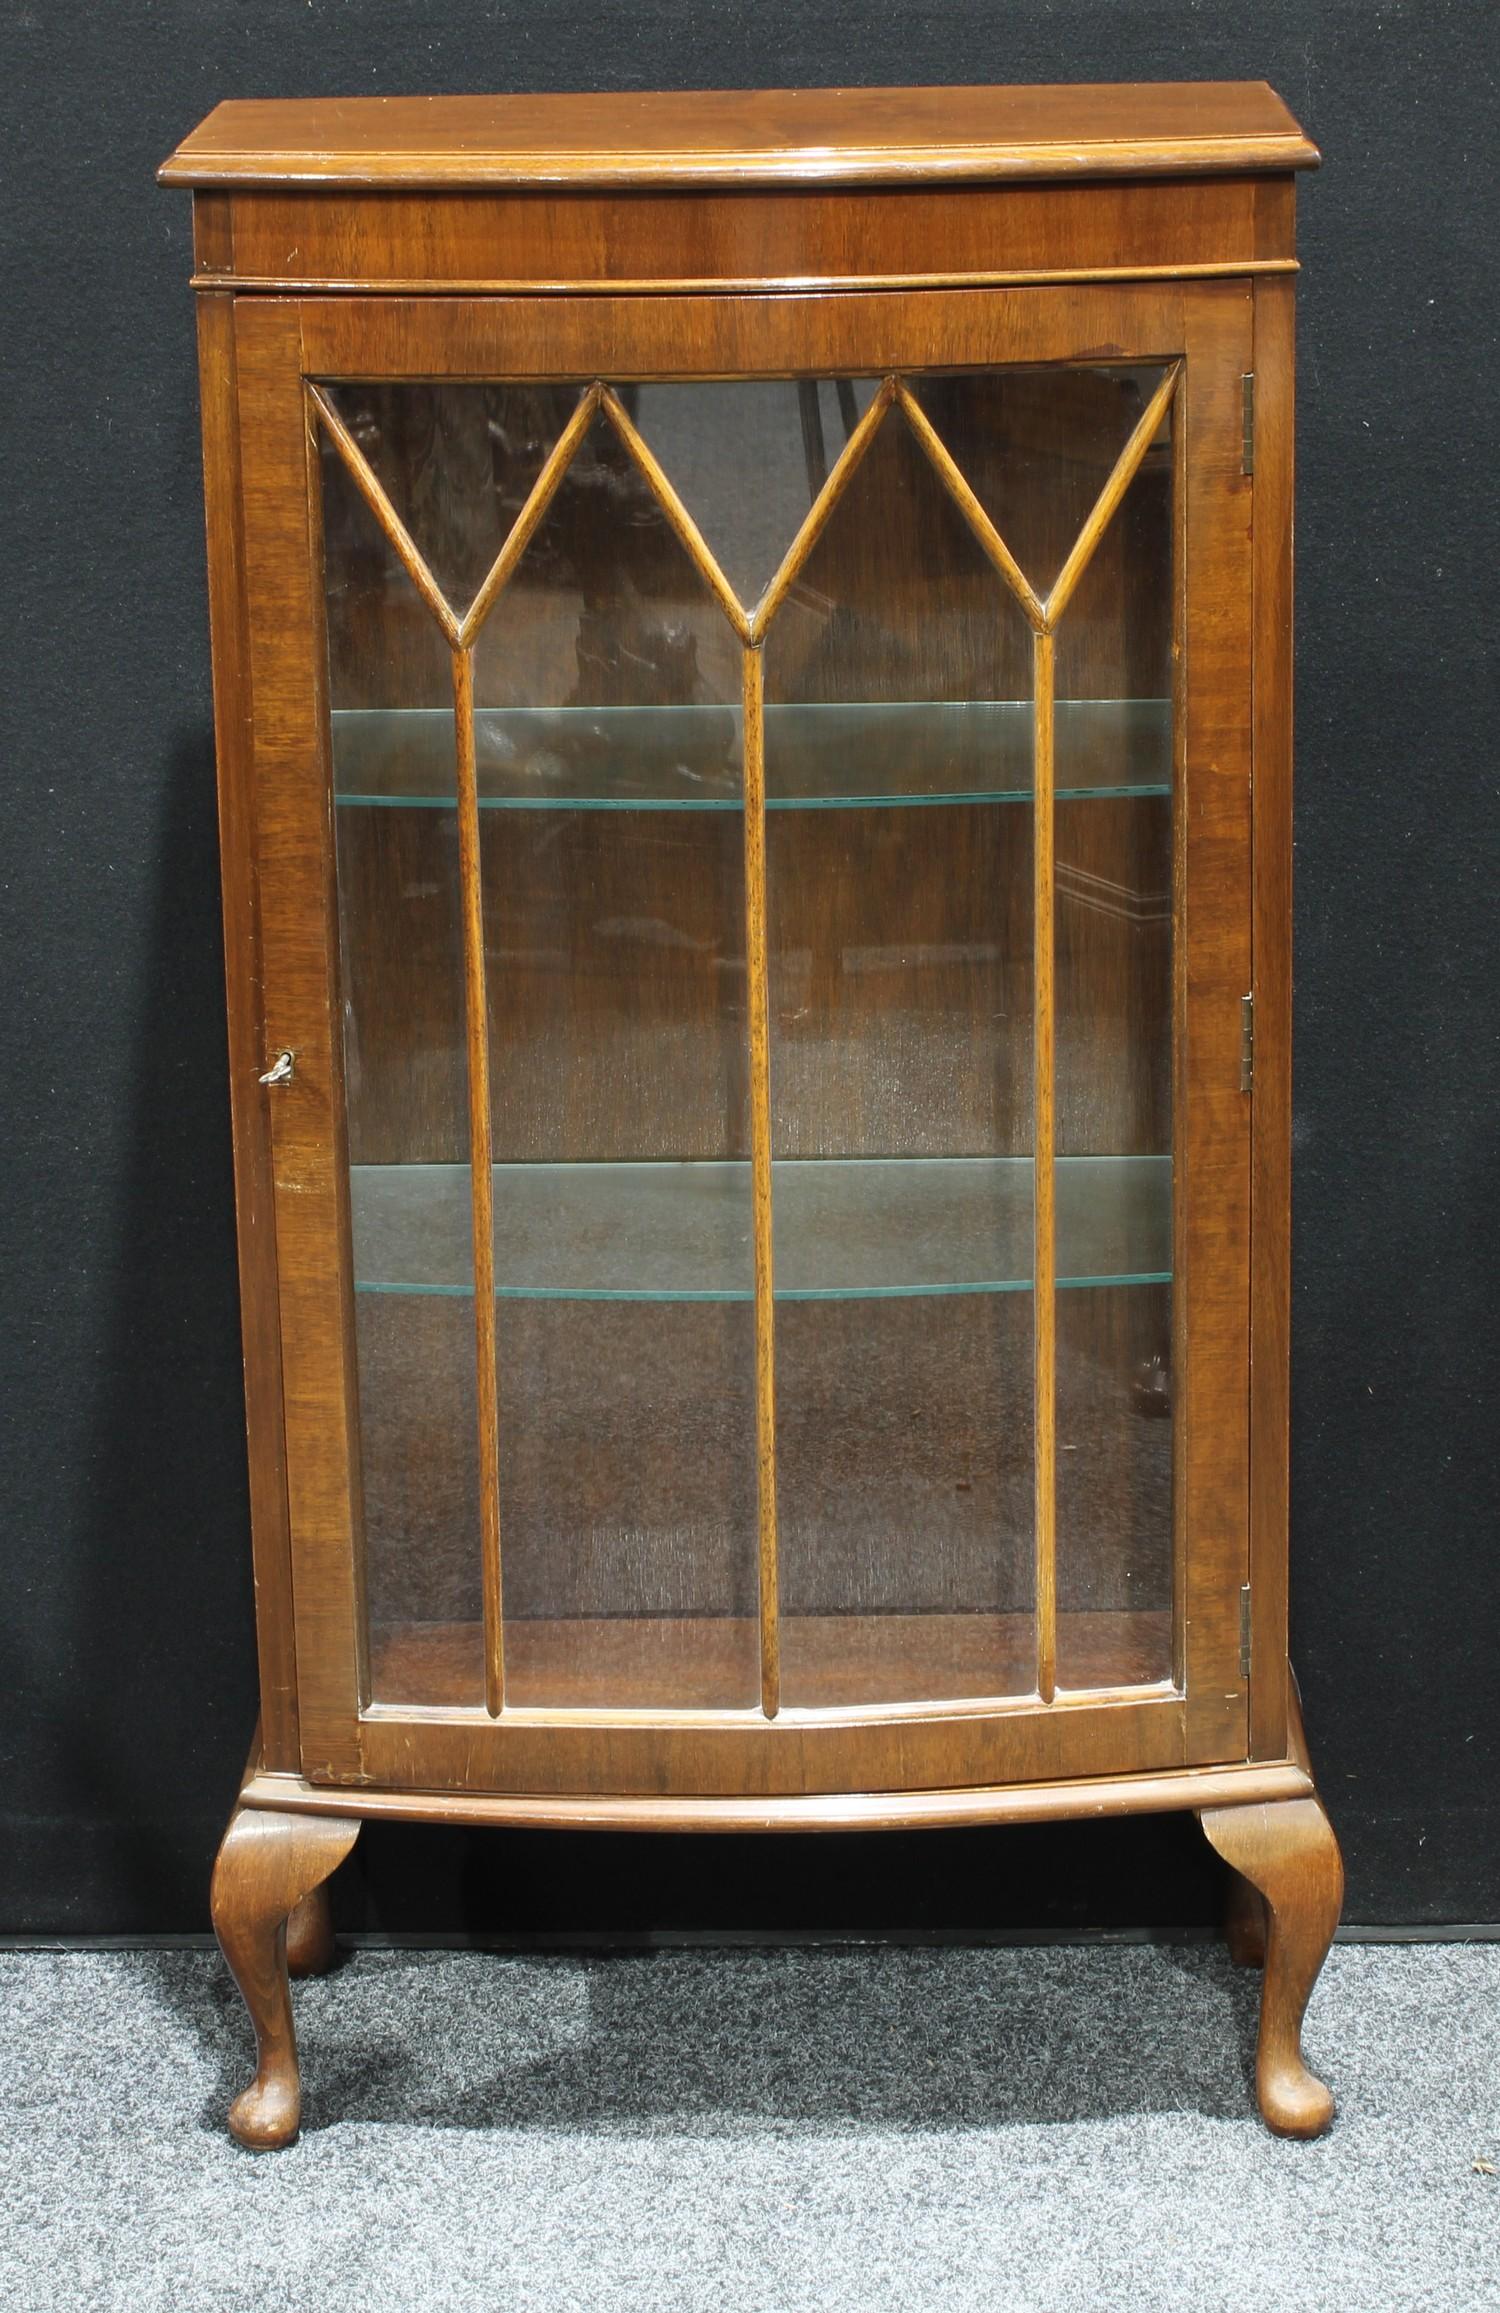 A Hunters of Derby mahogany bow front display cabinet, glazed door enclosing glass shelves, cabriole